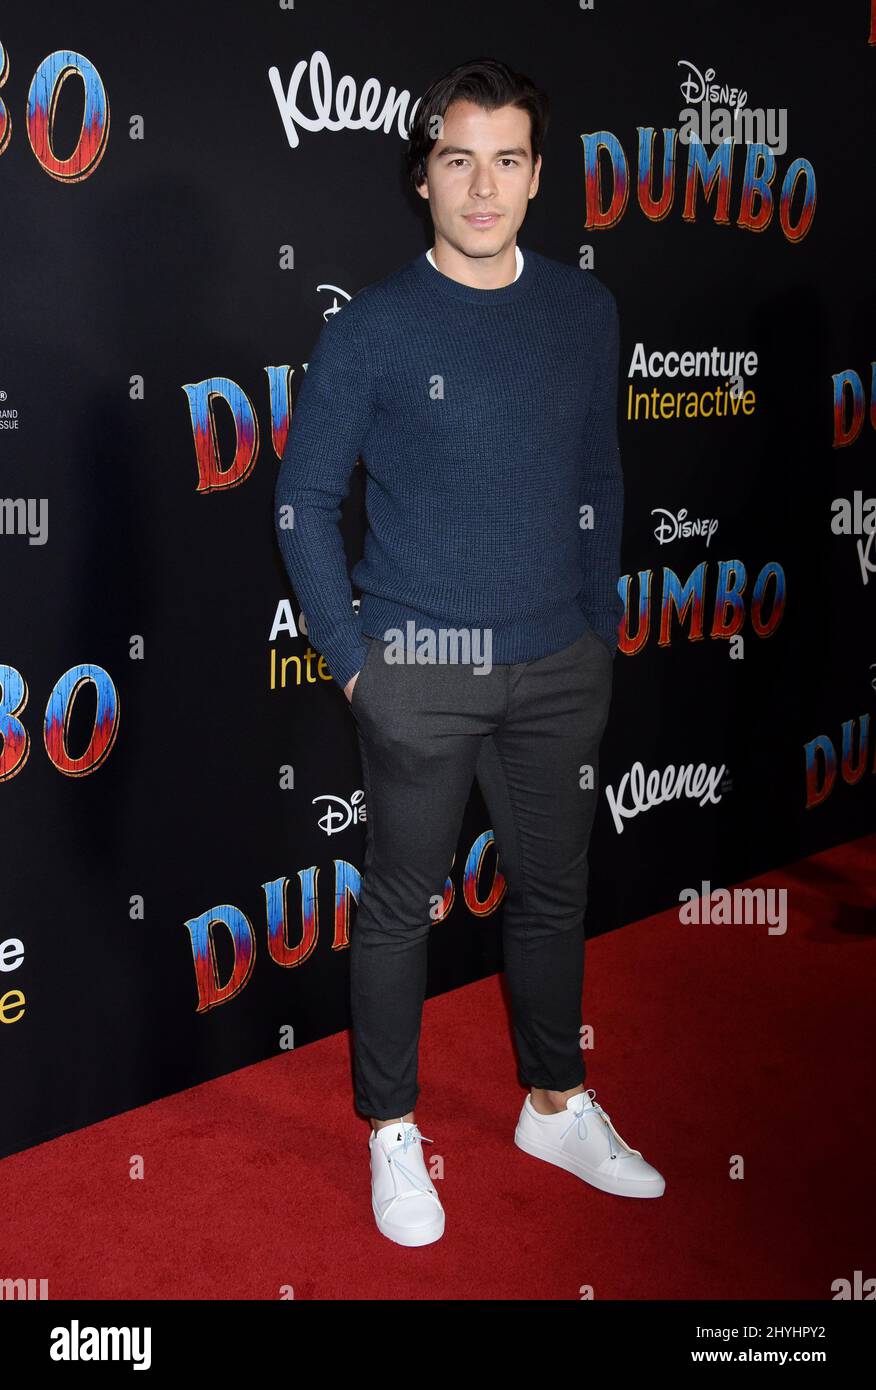 Manolo Gonzalez arriving for Disney's premiere of 'Dumbo' held at the El Capitan Theatre on March 11, 2019 in Hollywood, Los Angeles. Stock Photo